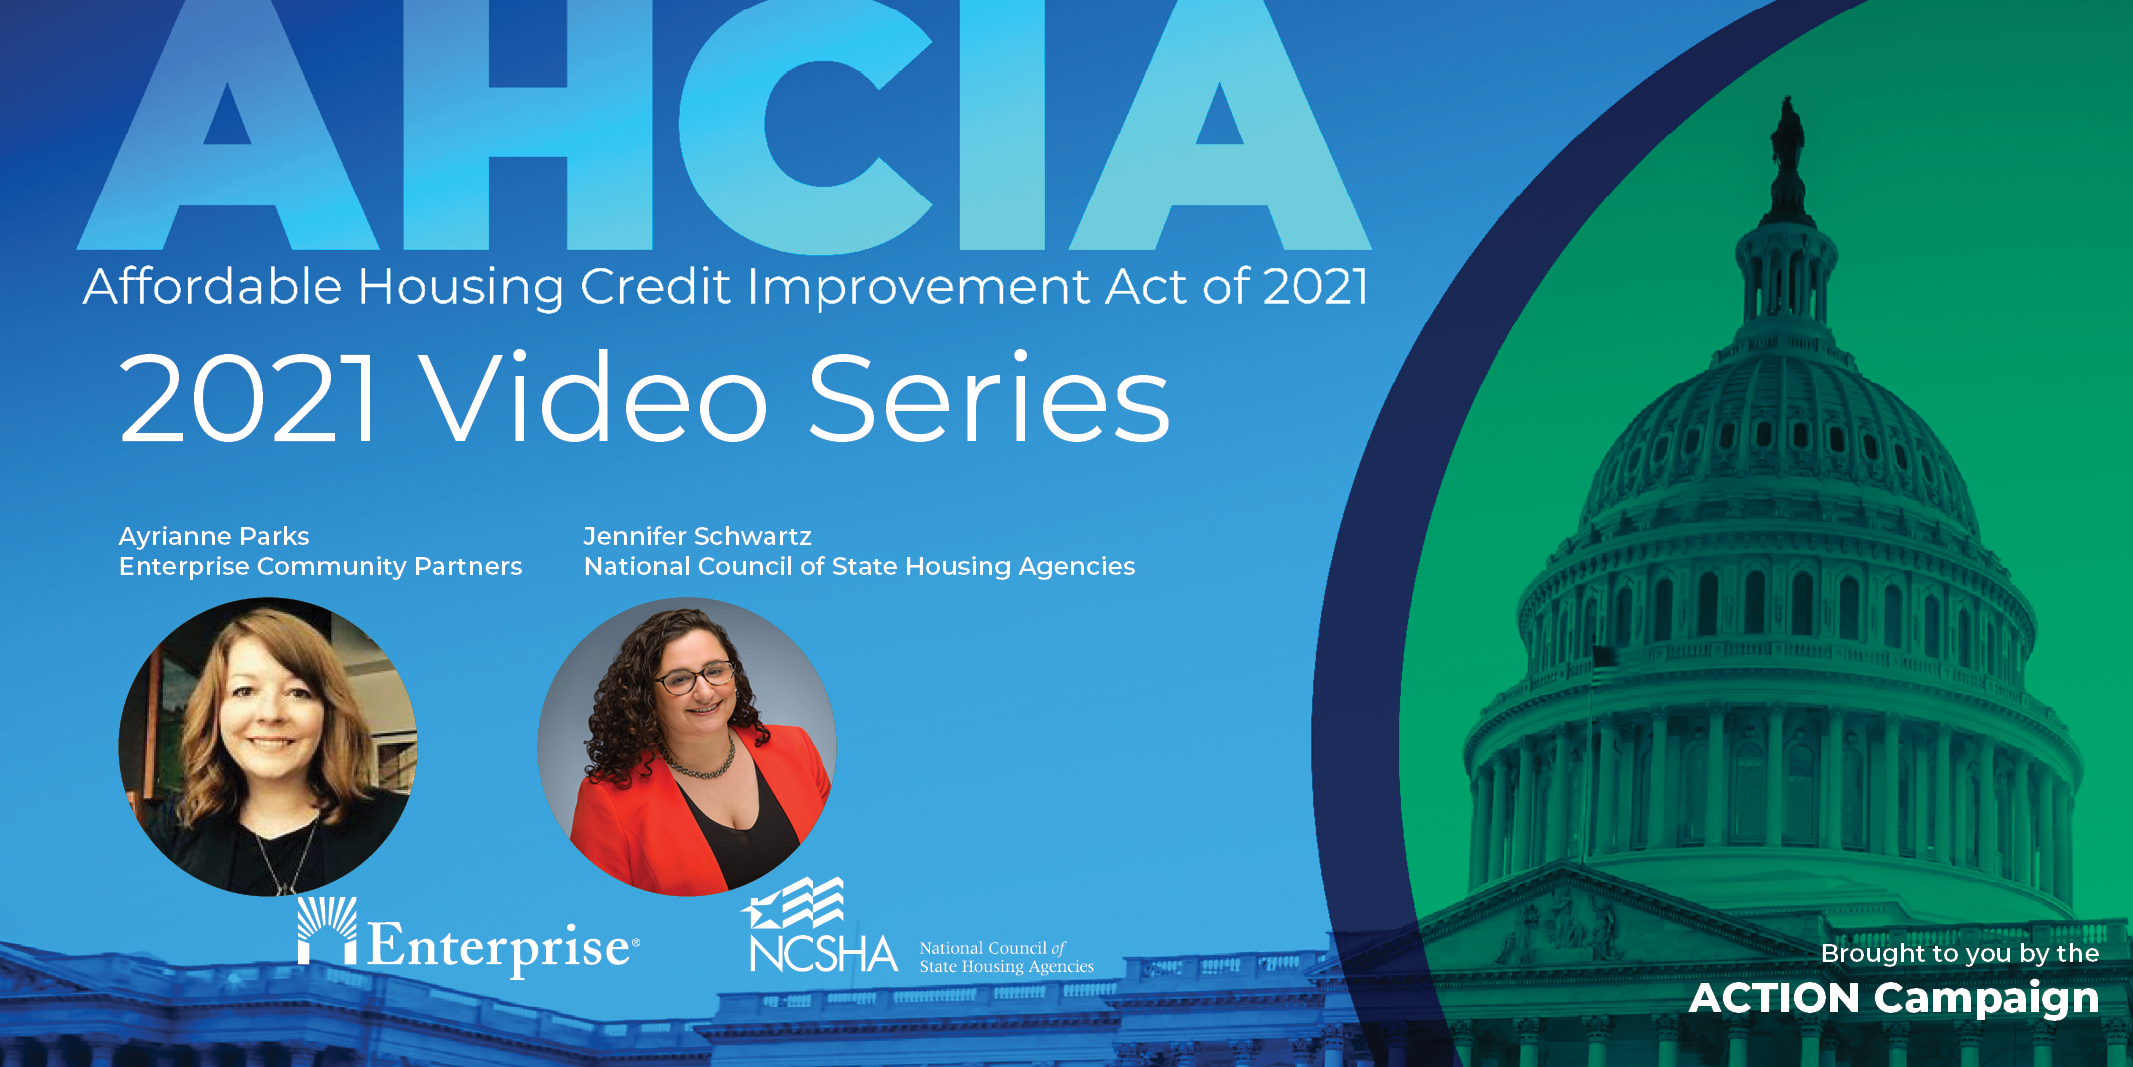 Affordable Housing Credit Improvement Act of 2021: Video Series